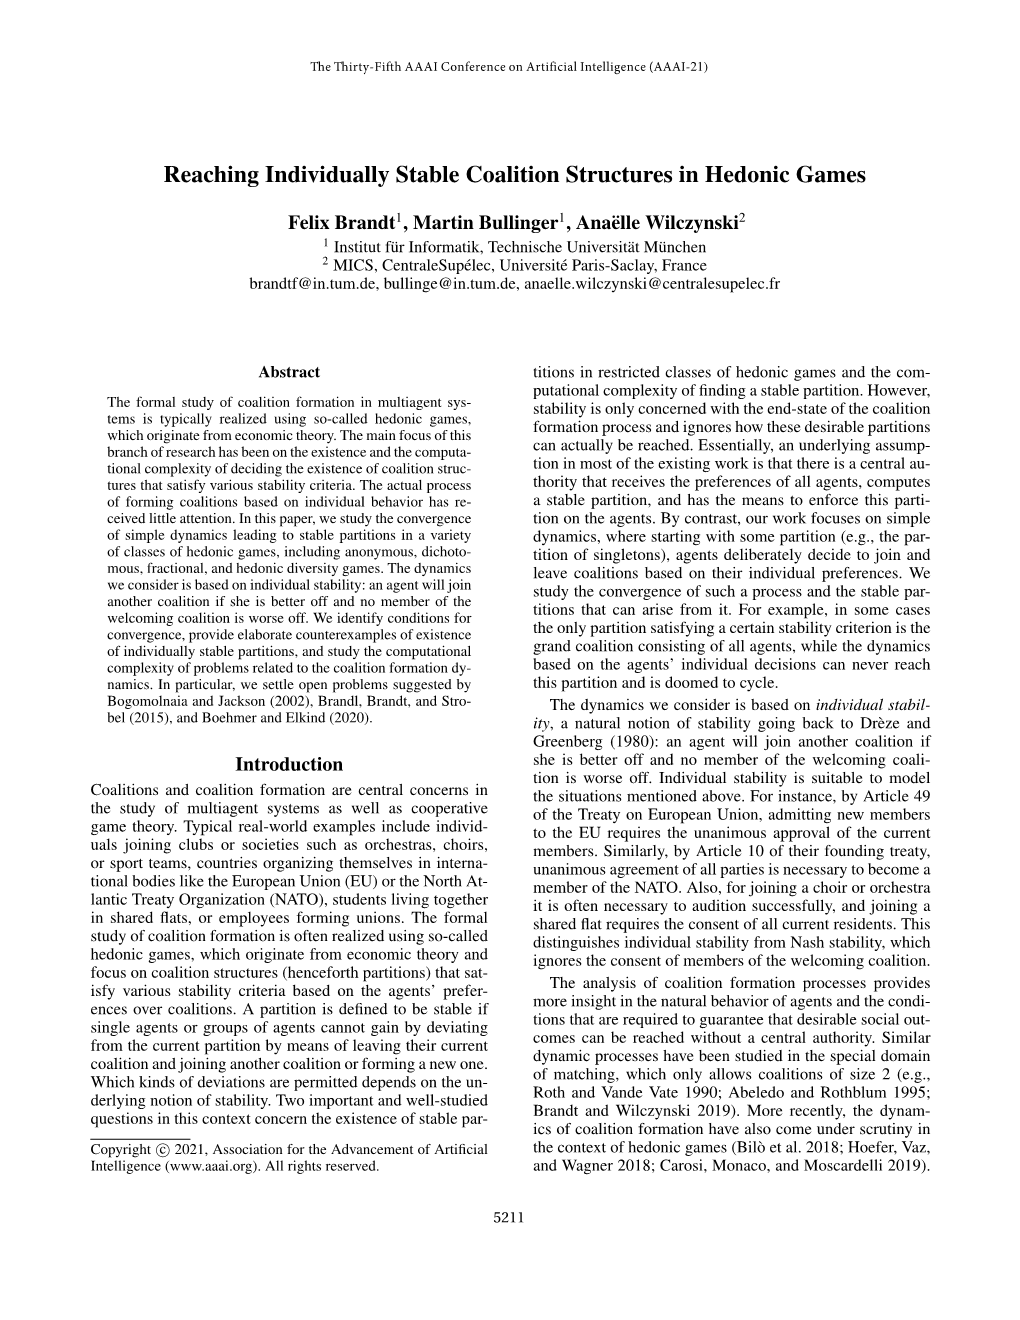 Reaching Individually Stable Coalition Structures in Hedonic Games